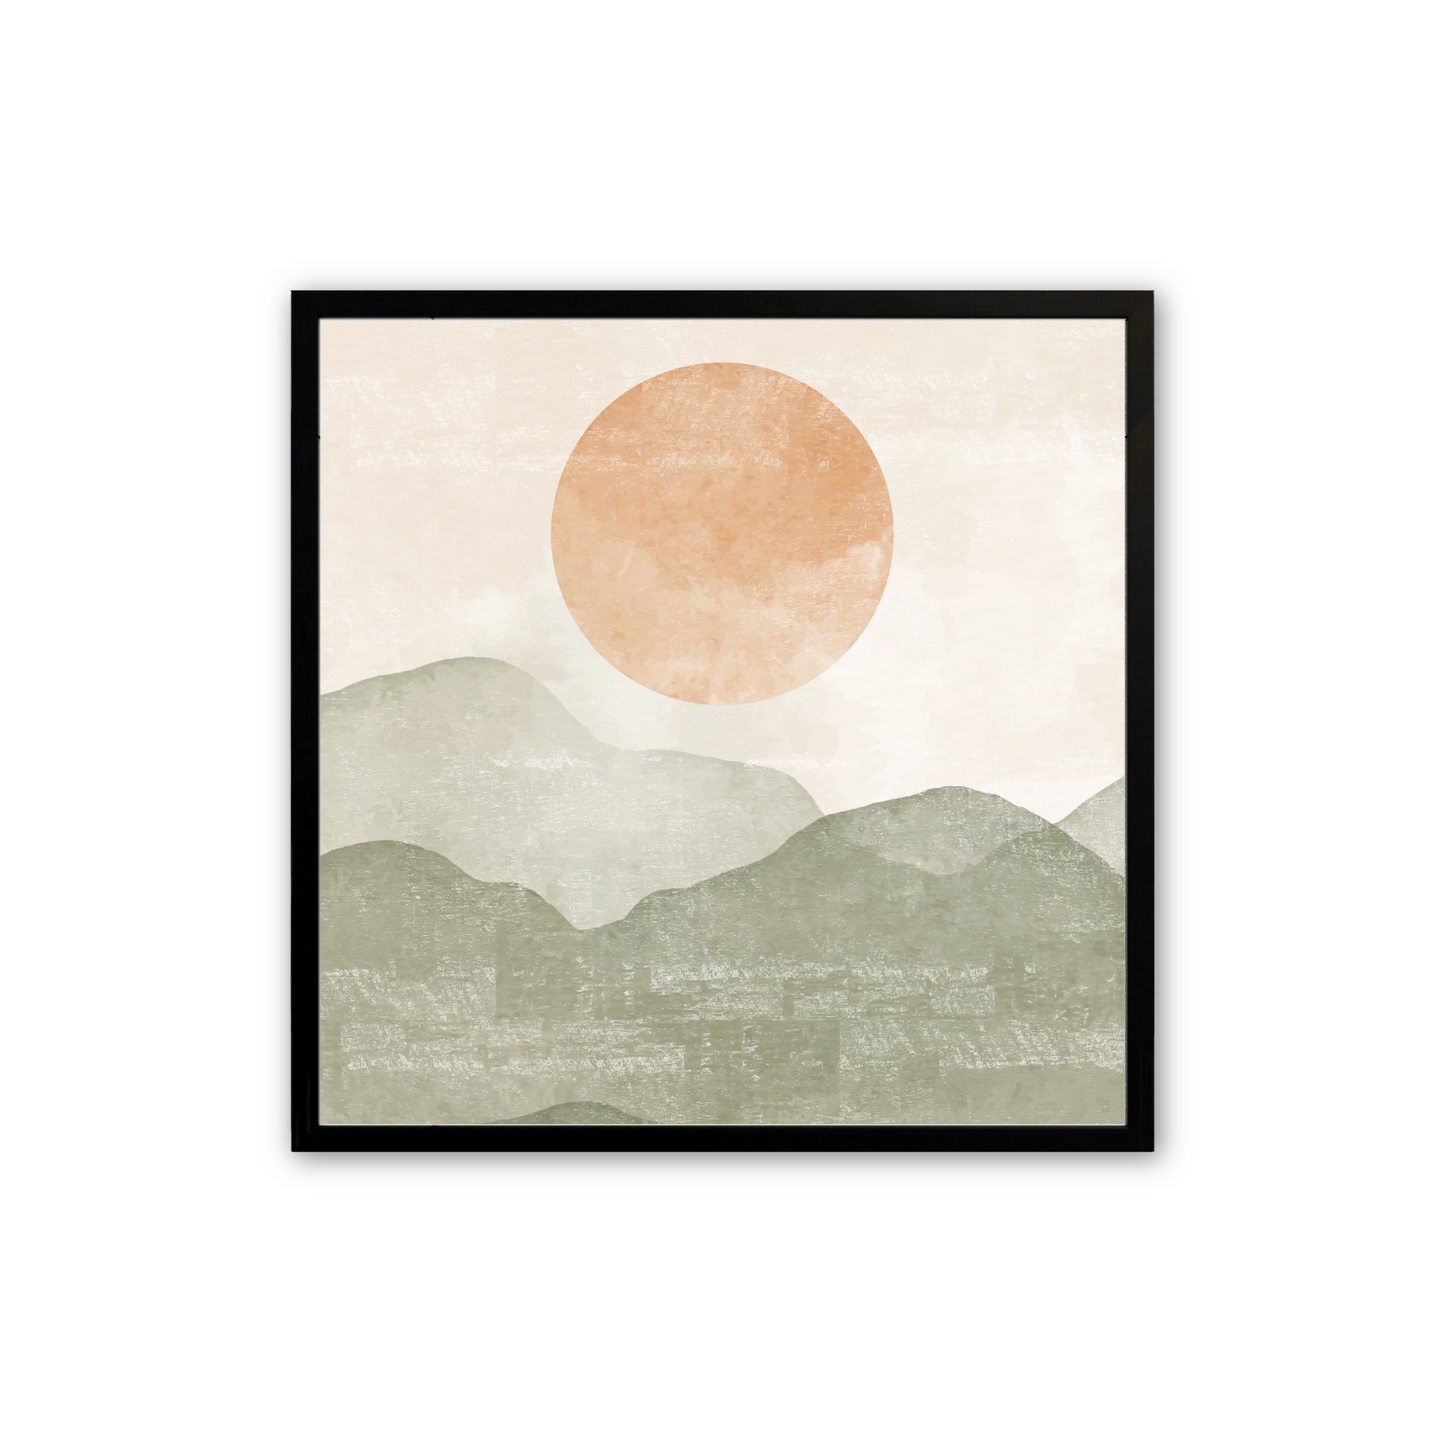 [color:Satin Black], Picture of the third of 3 mountain illustrations in a black frame